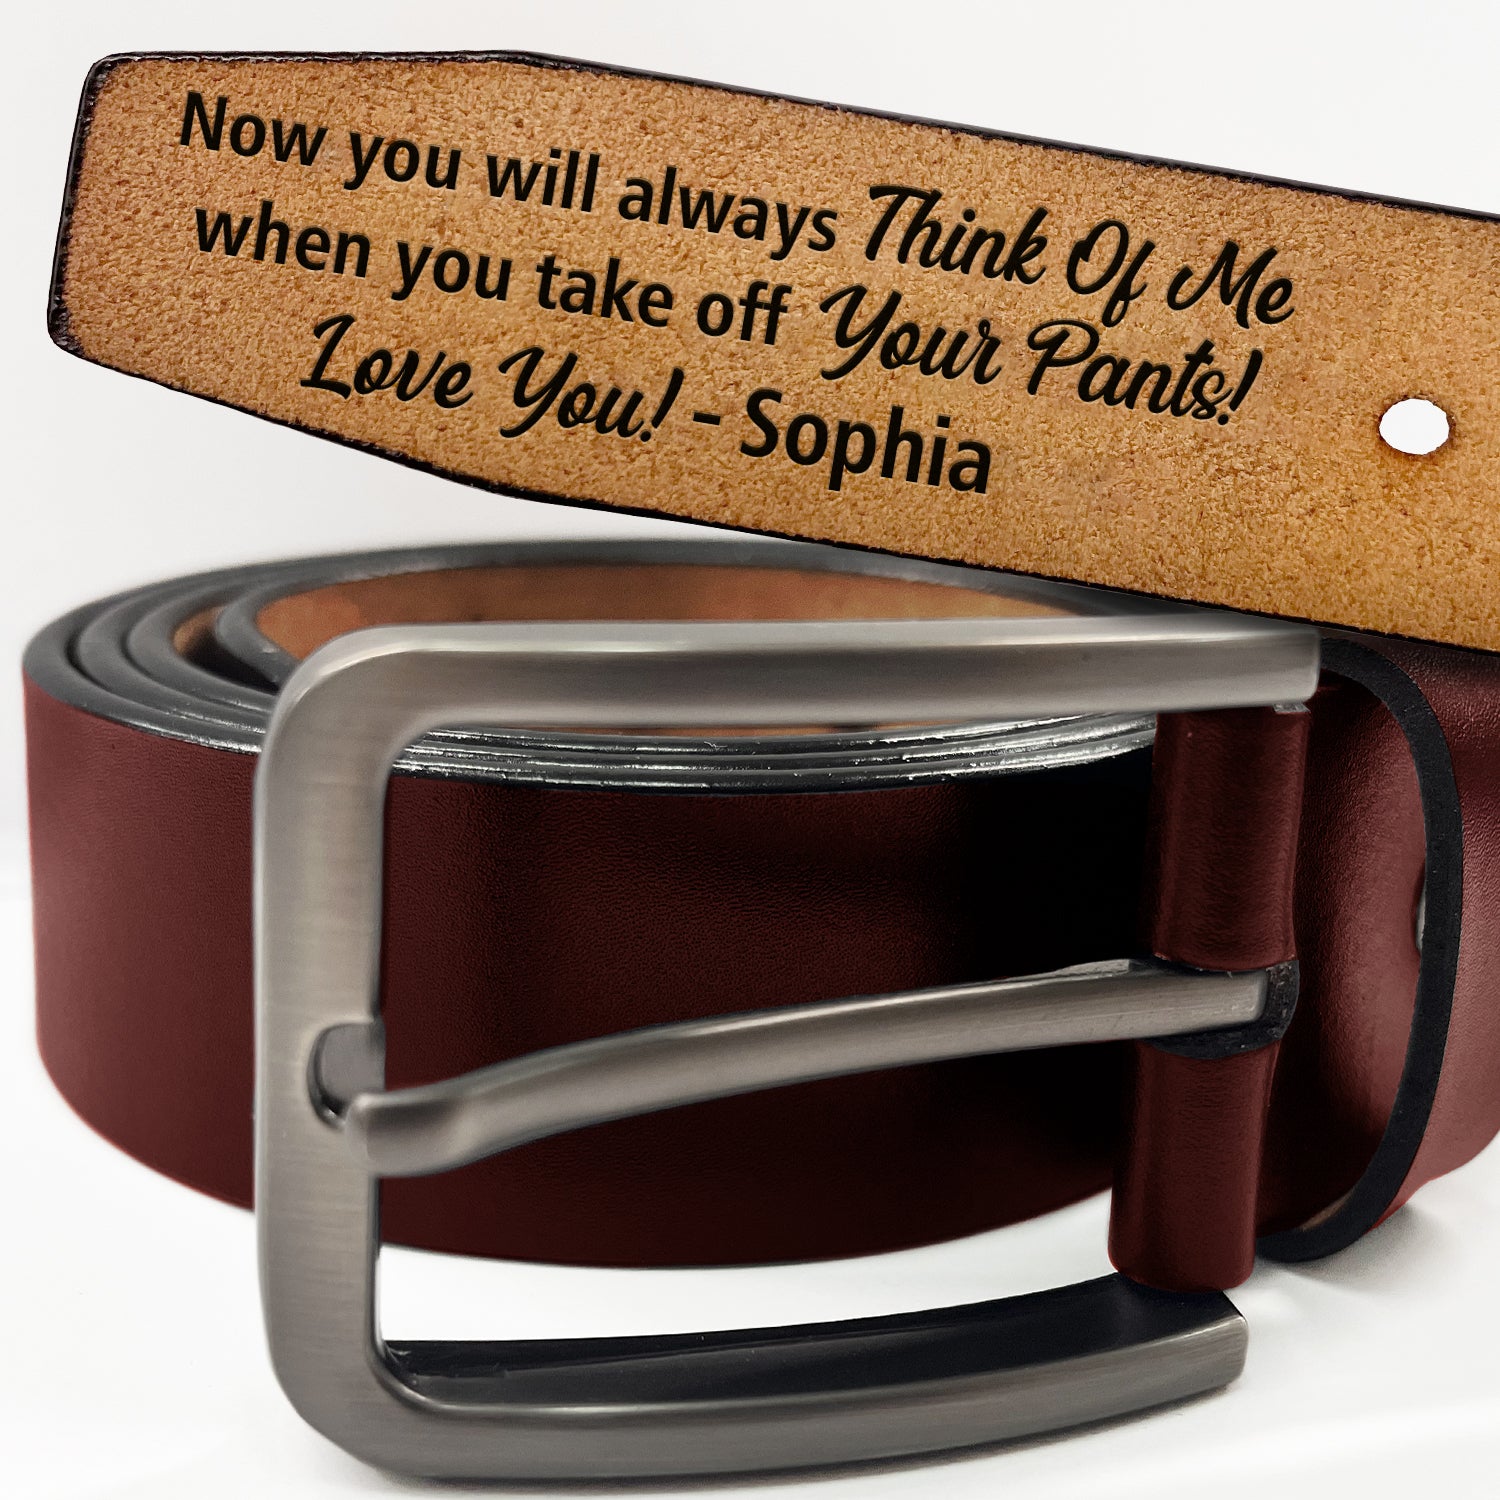 Now You Will Always Think Of Me - Funny Gift For Husband, Boyfriend From Wife, Girlfriend - Personalized Engraved Leather Belt